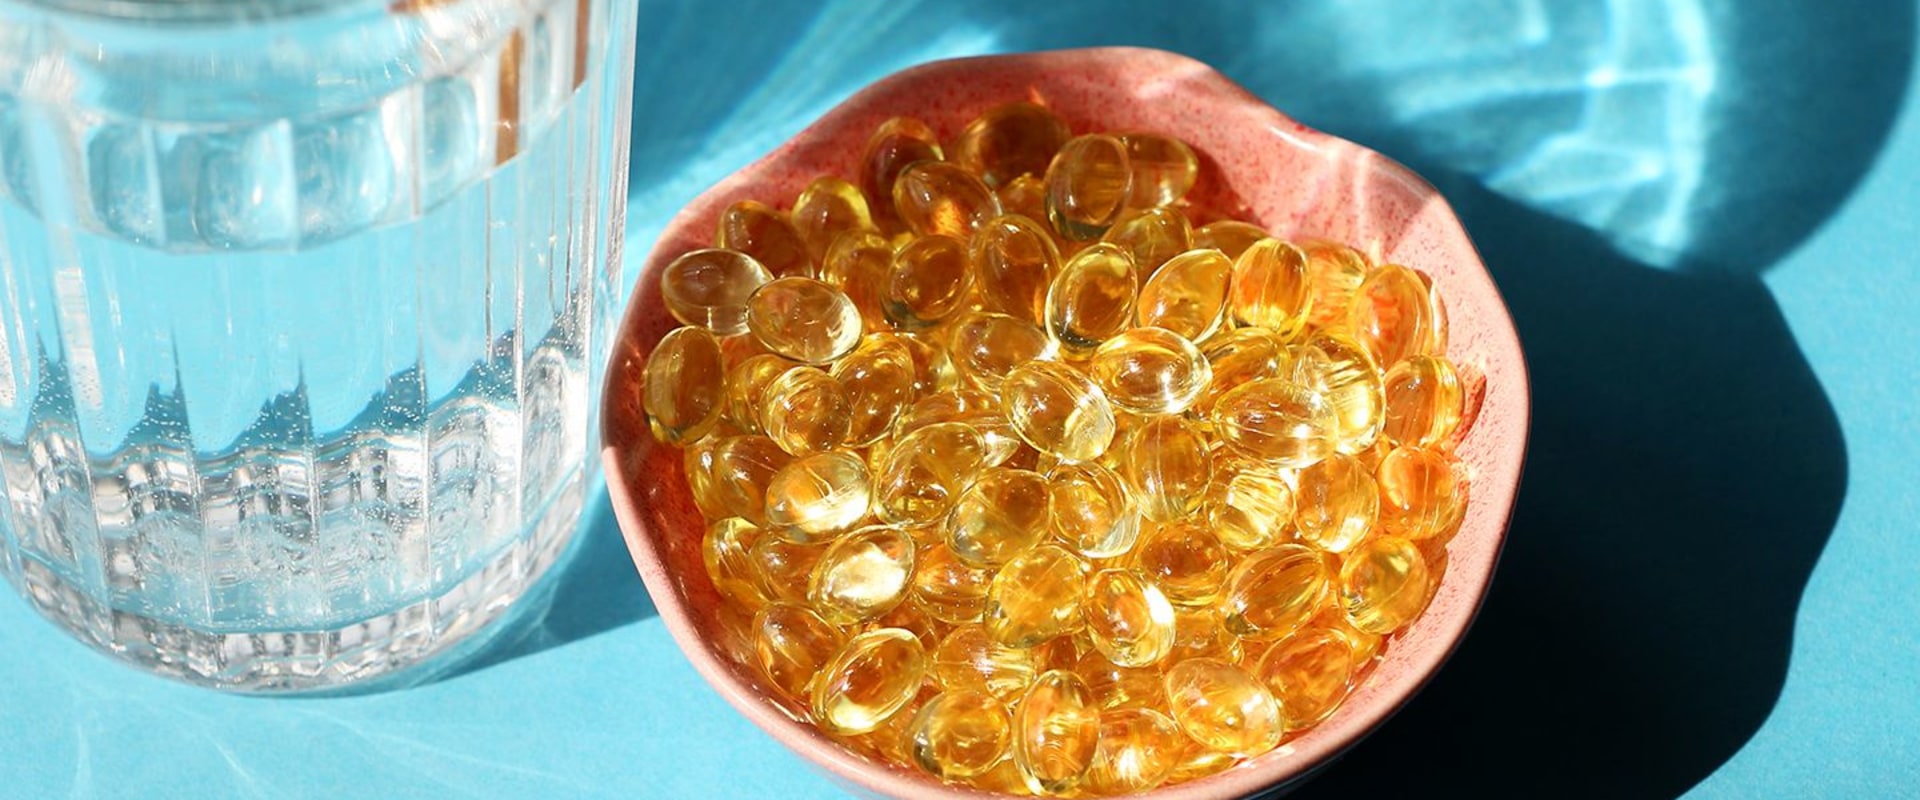 How to Get Enough Vitamin D to Prevent Arthritis